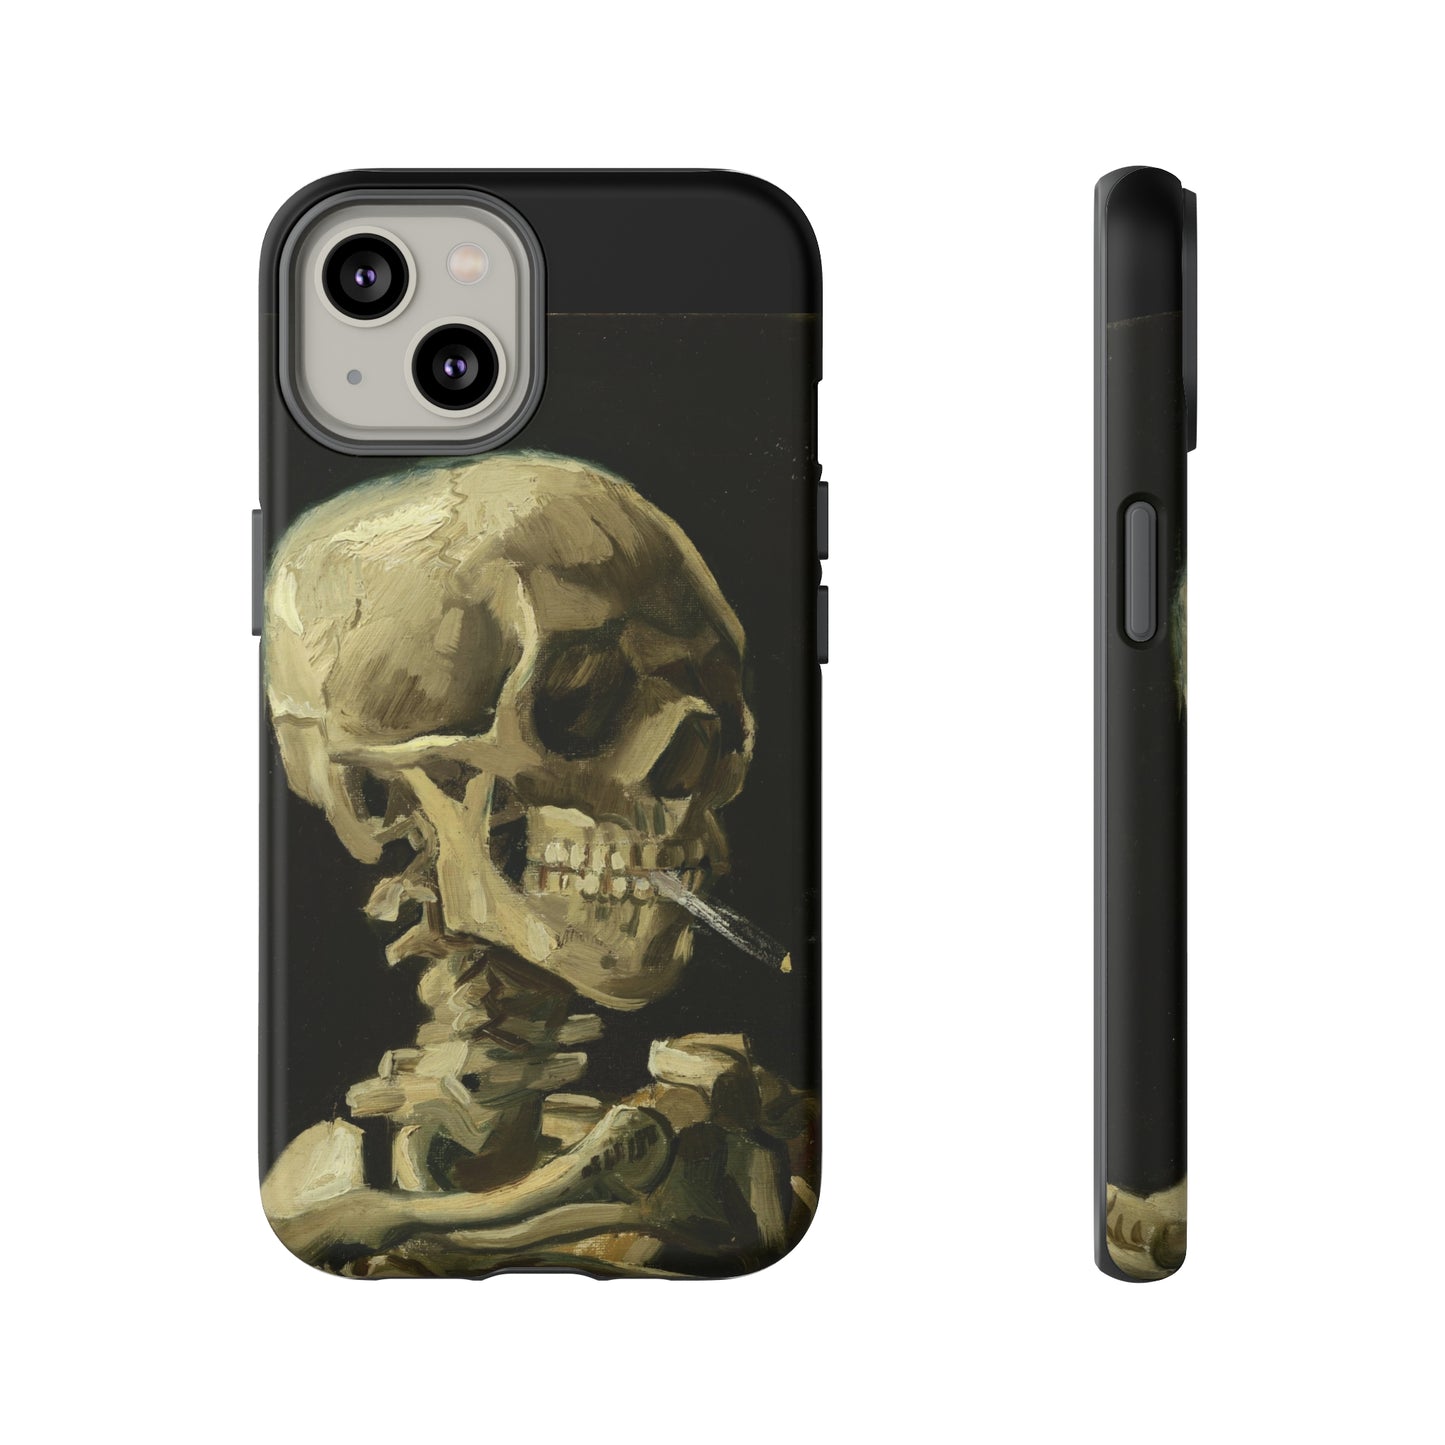 Skull of a Skeleton with a Burning Cigarette by Vincent Van Gogh - Cell Phone Case